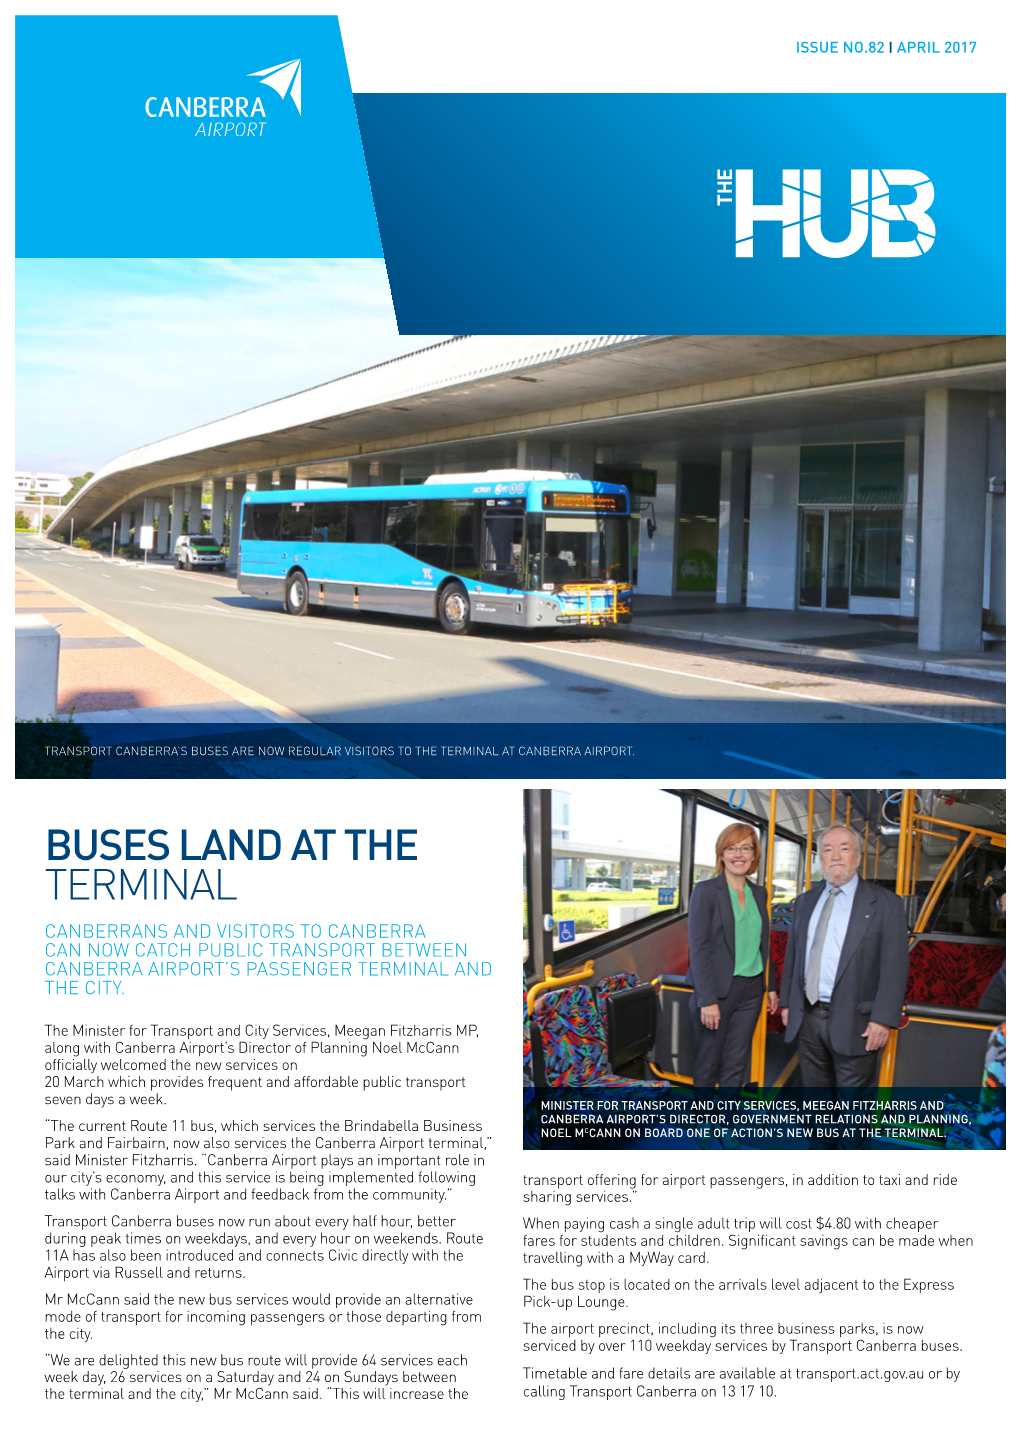 Buses Land at the Terminal Canberrans and Visitors to Canberra Can Now Catch Public Transport Between Canberra Airport’S Passenger Terminal and the City